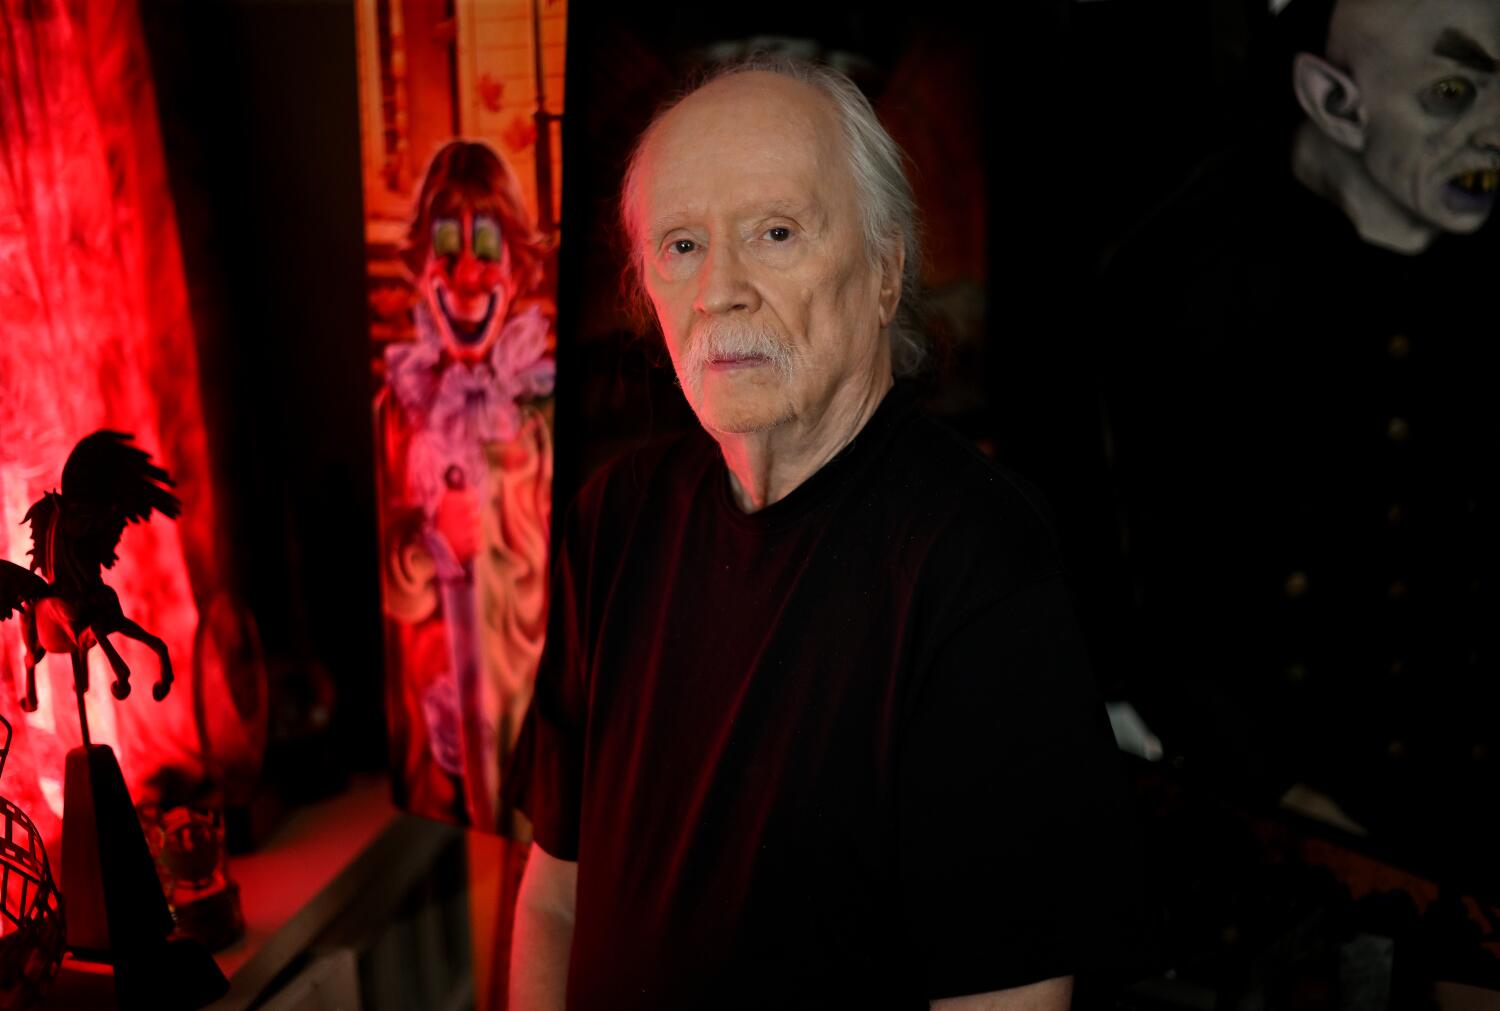 John Carpenter returns to the director's chair with true terror anthology 'Suburban Screams'